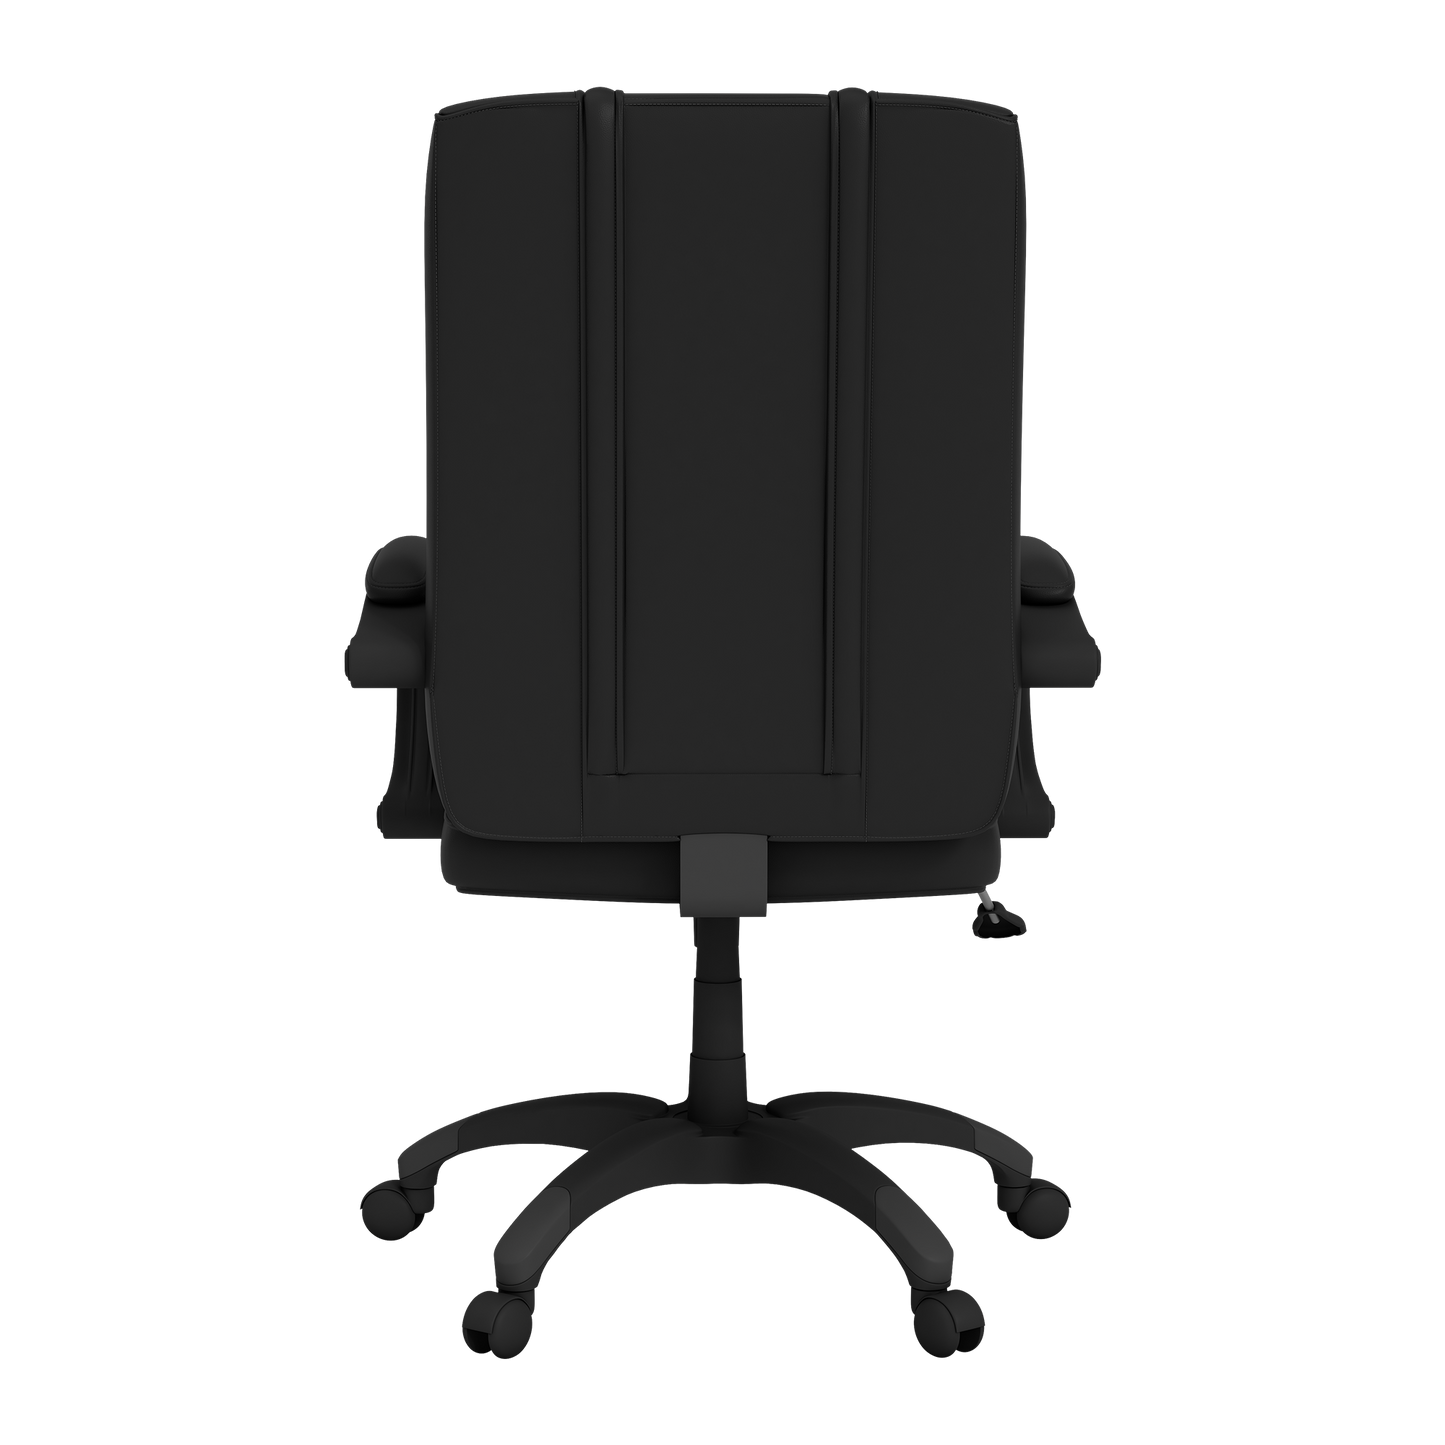 Office Chair 1000 with Atlanta Braves Logo